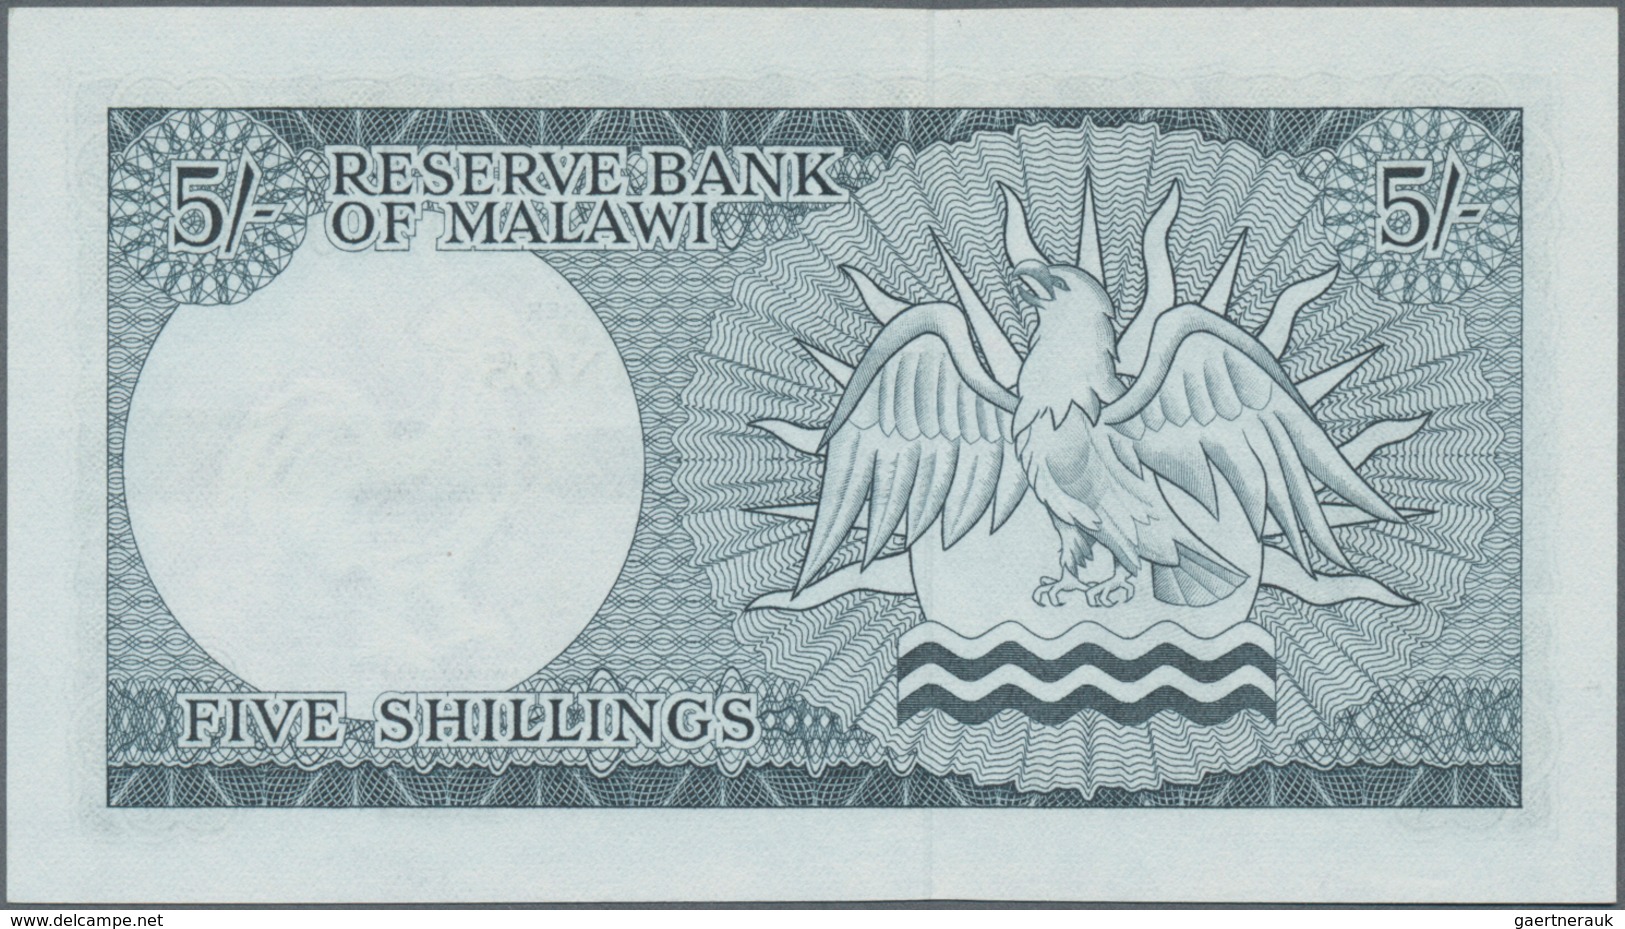 Malawi: Reserve Bank Of Malawi 5 Shillings L.1964, P.1 In Perfect UNC Condition. - Malawi